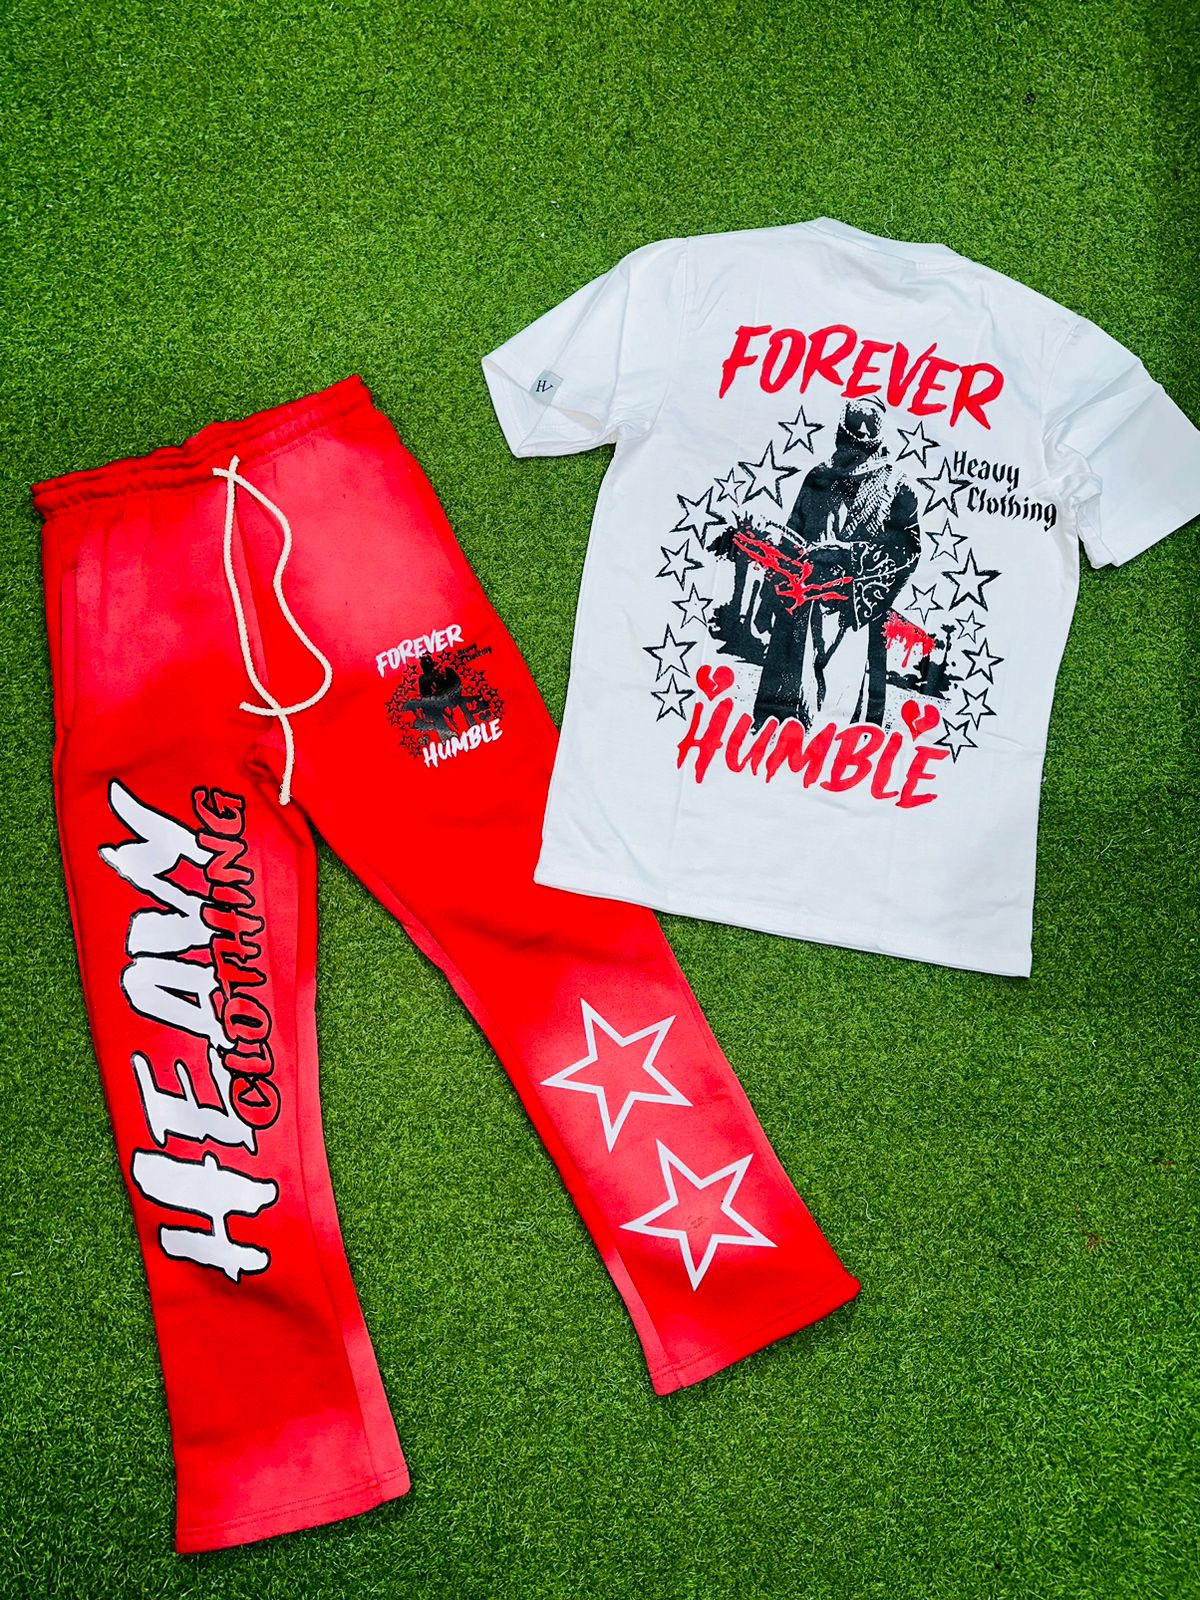 (By Heavy Clothing Forever Humble T Shirt Sets)